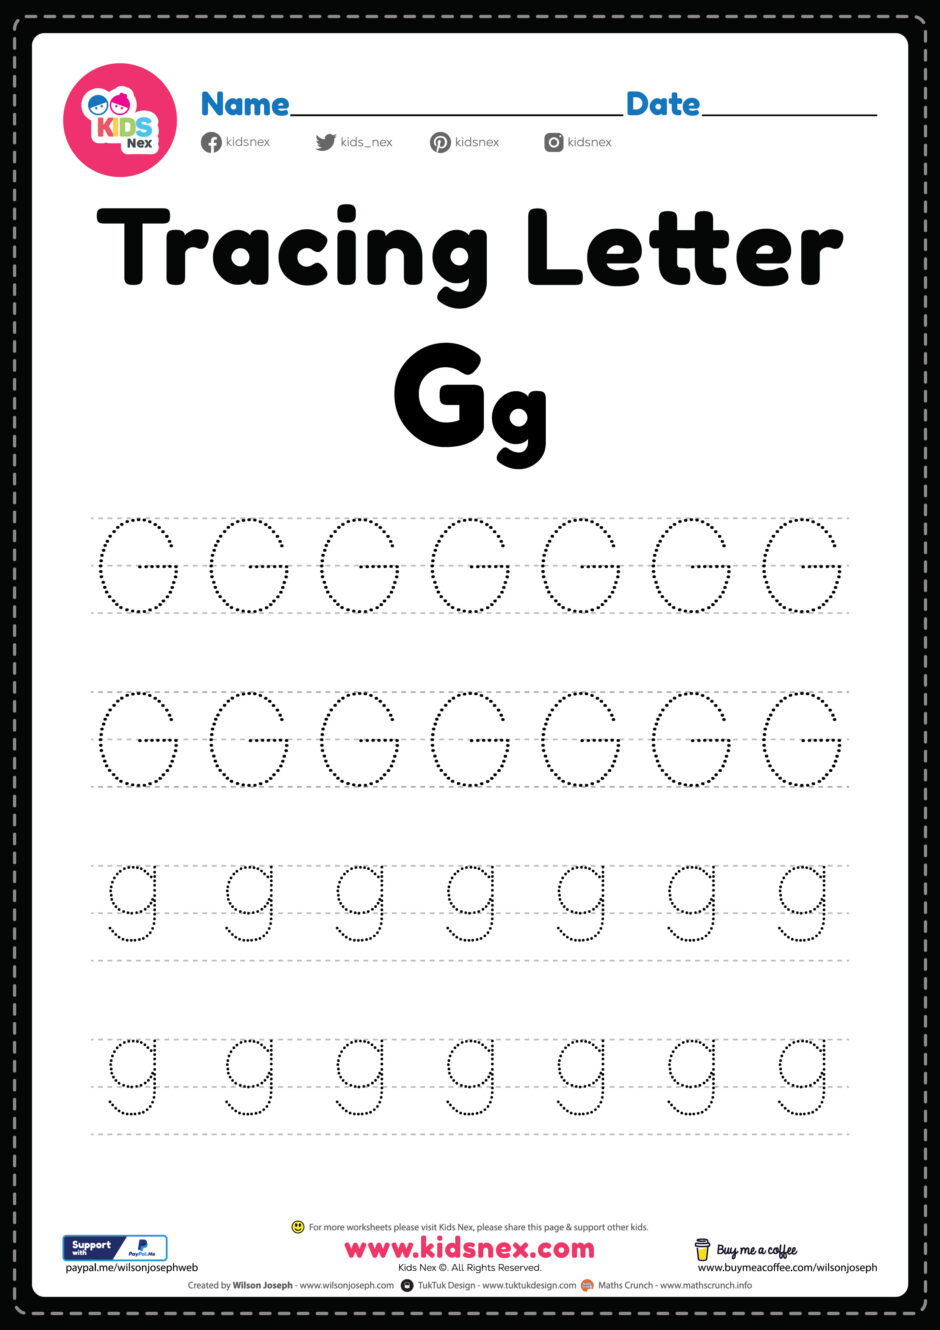 english-for-kids-step-by-step-letter-tracing-worksheets-letters-a-j-alphabet-tracing-small